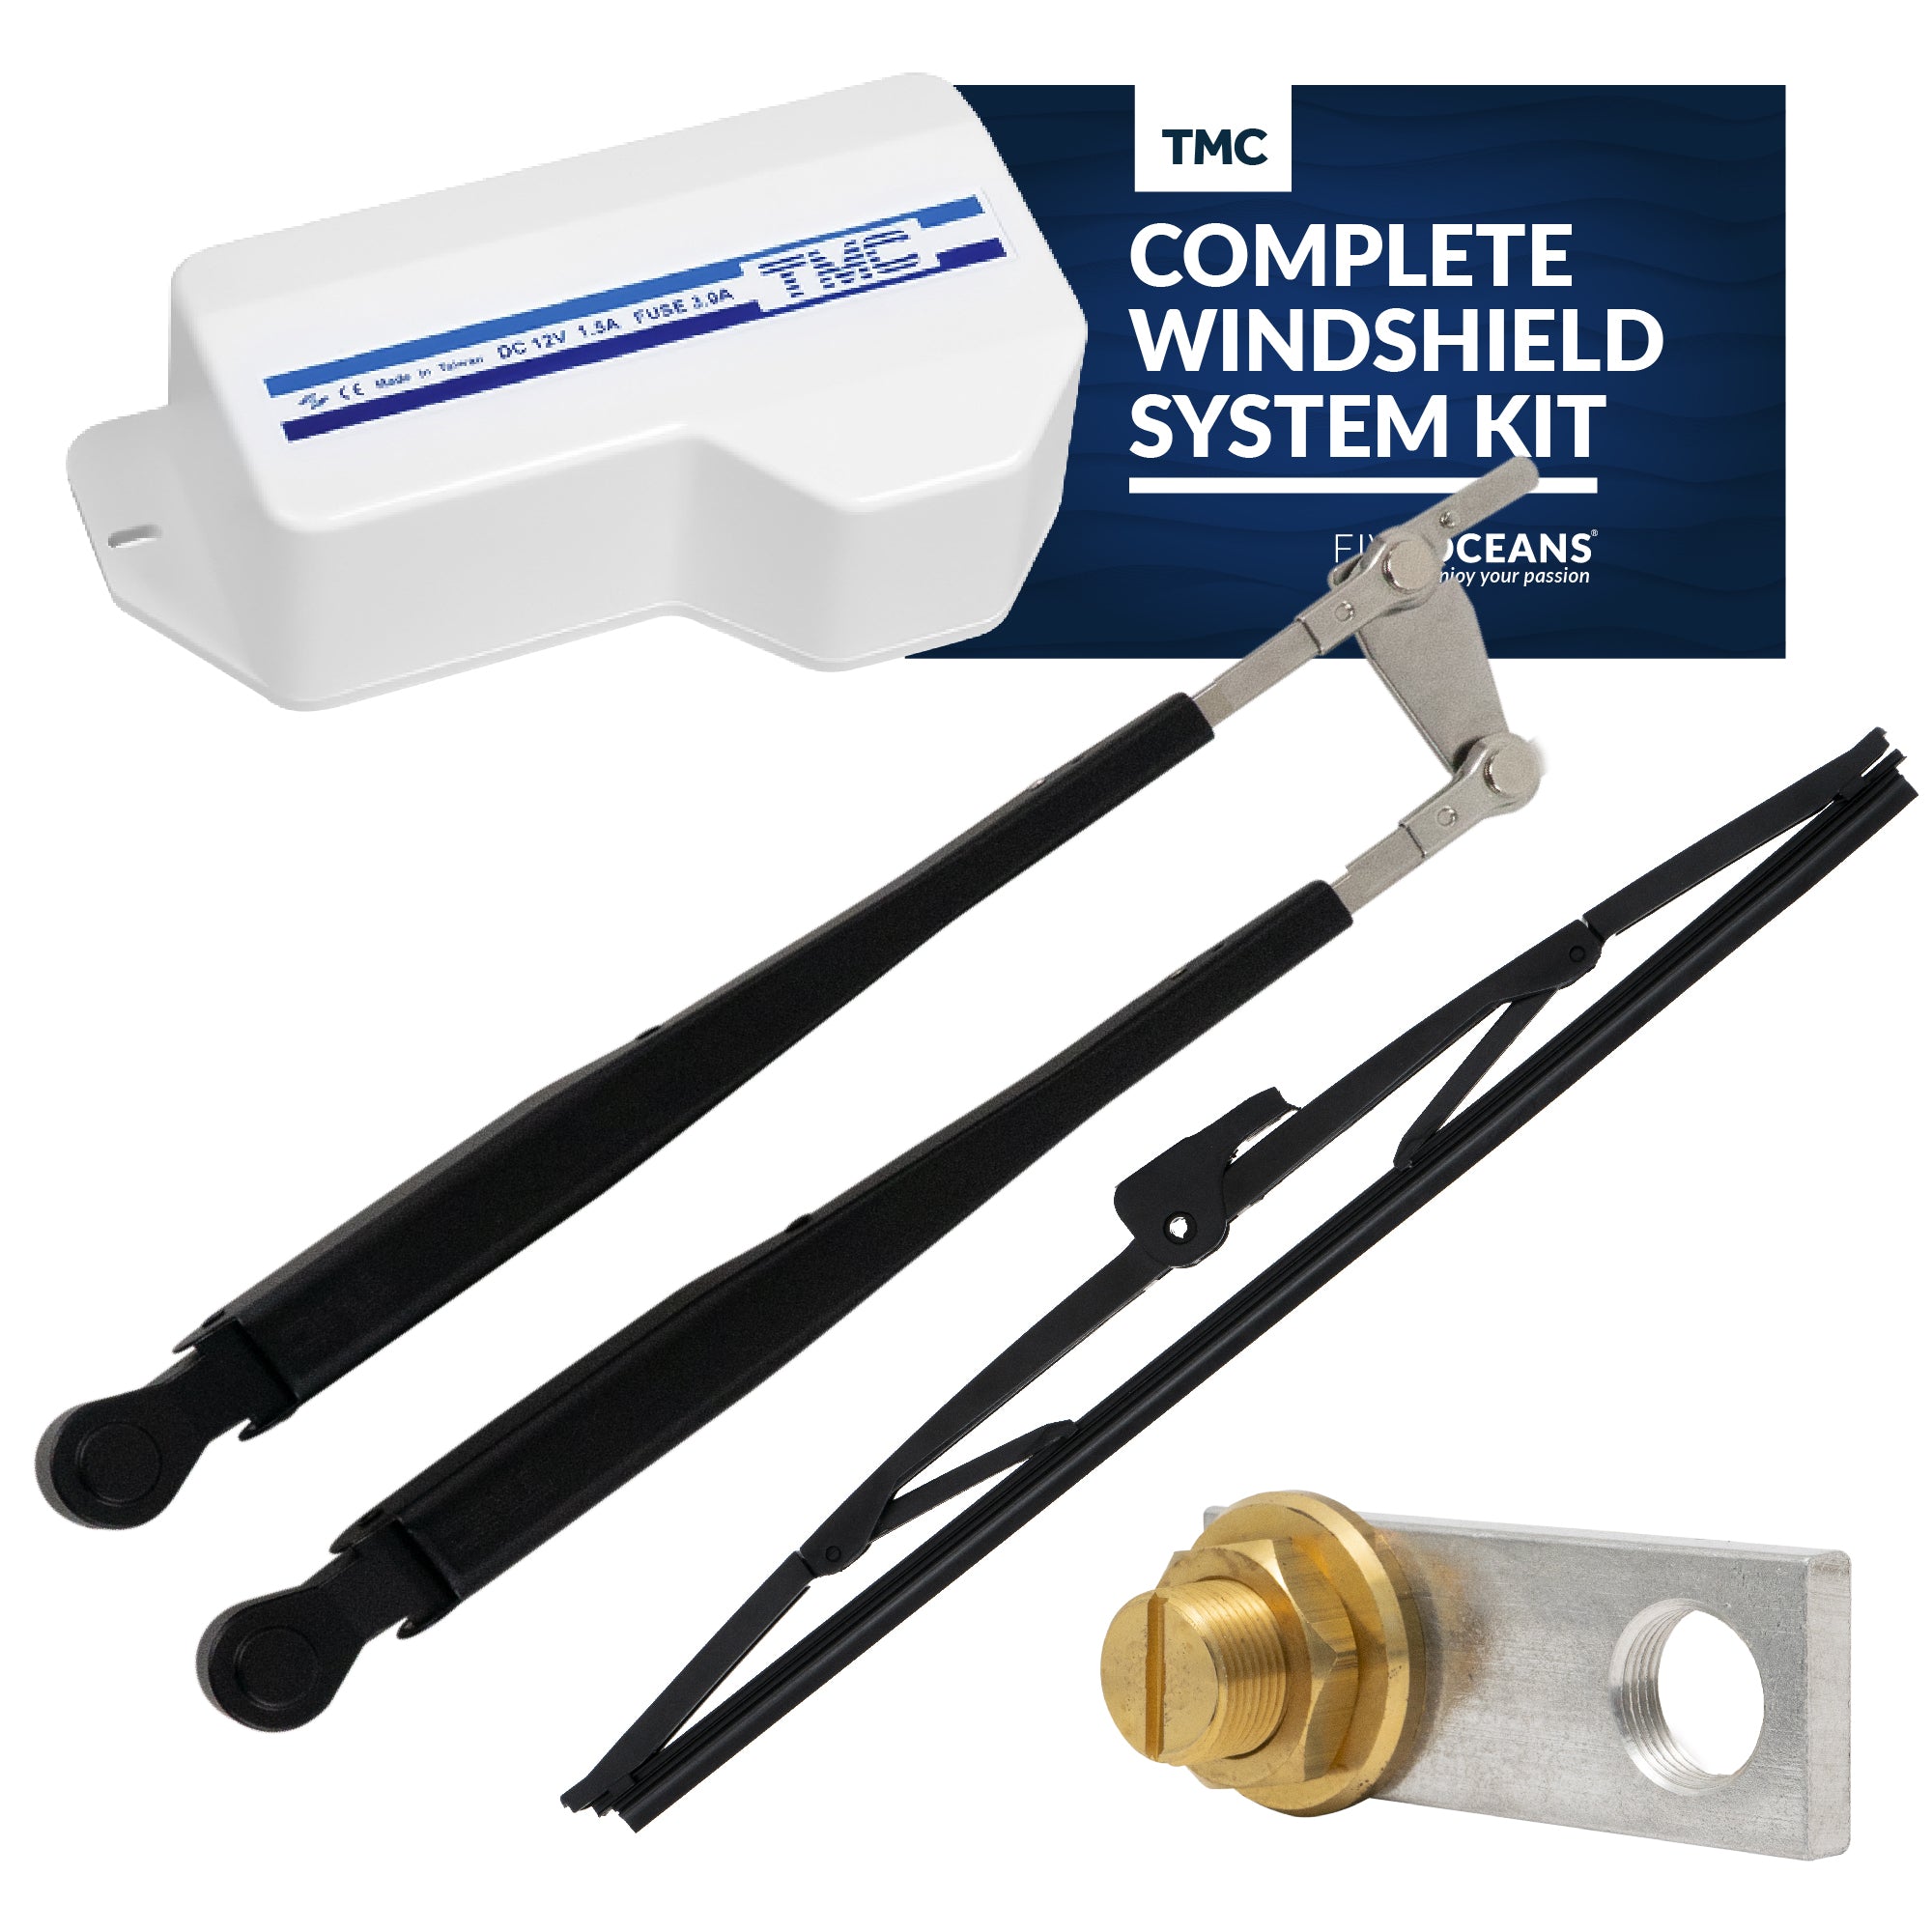 TMC Complete Windshield System Kit  - FO746-C9